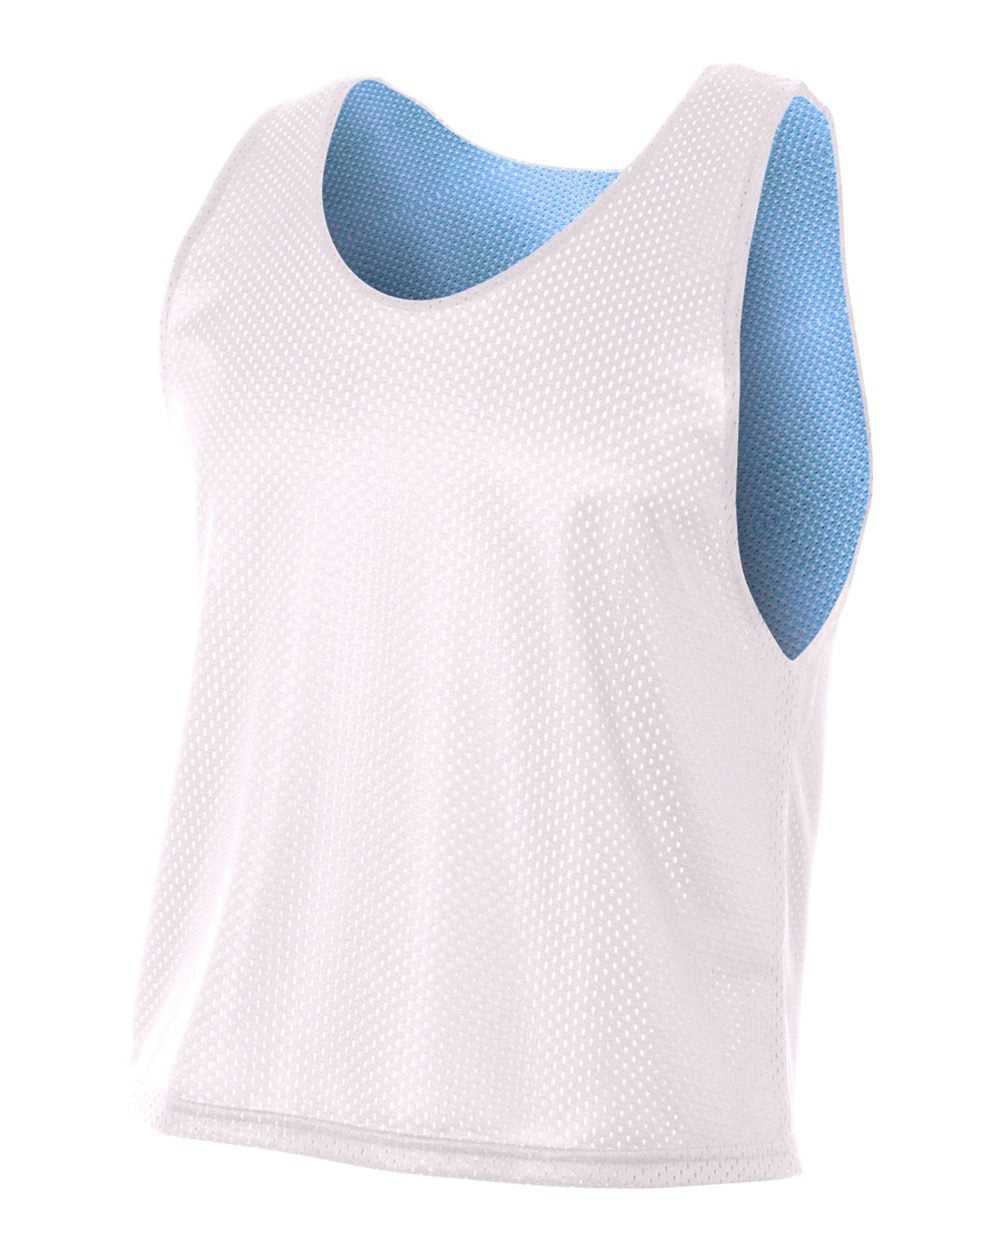 A4 N2274 Lacrosse Reversible Practice Jersey - White Light Blue - HIT a Double